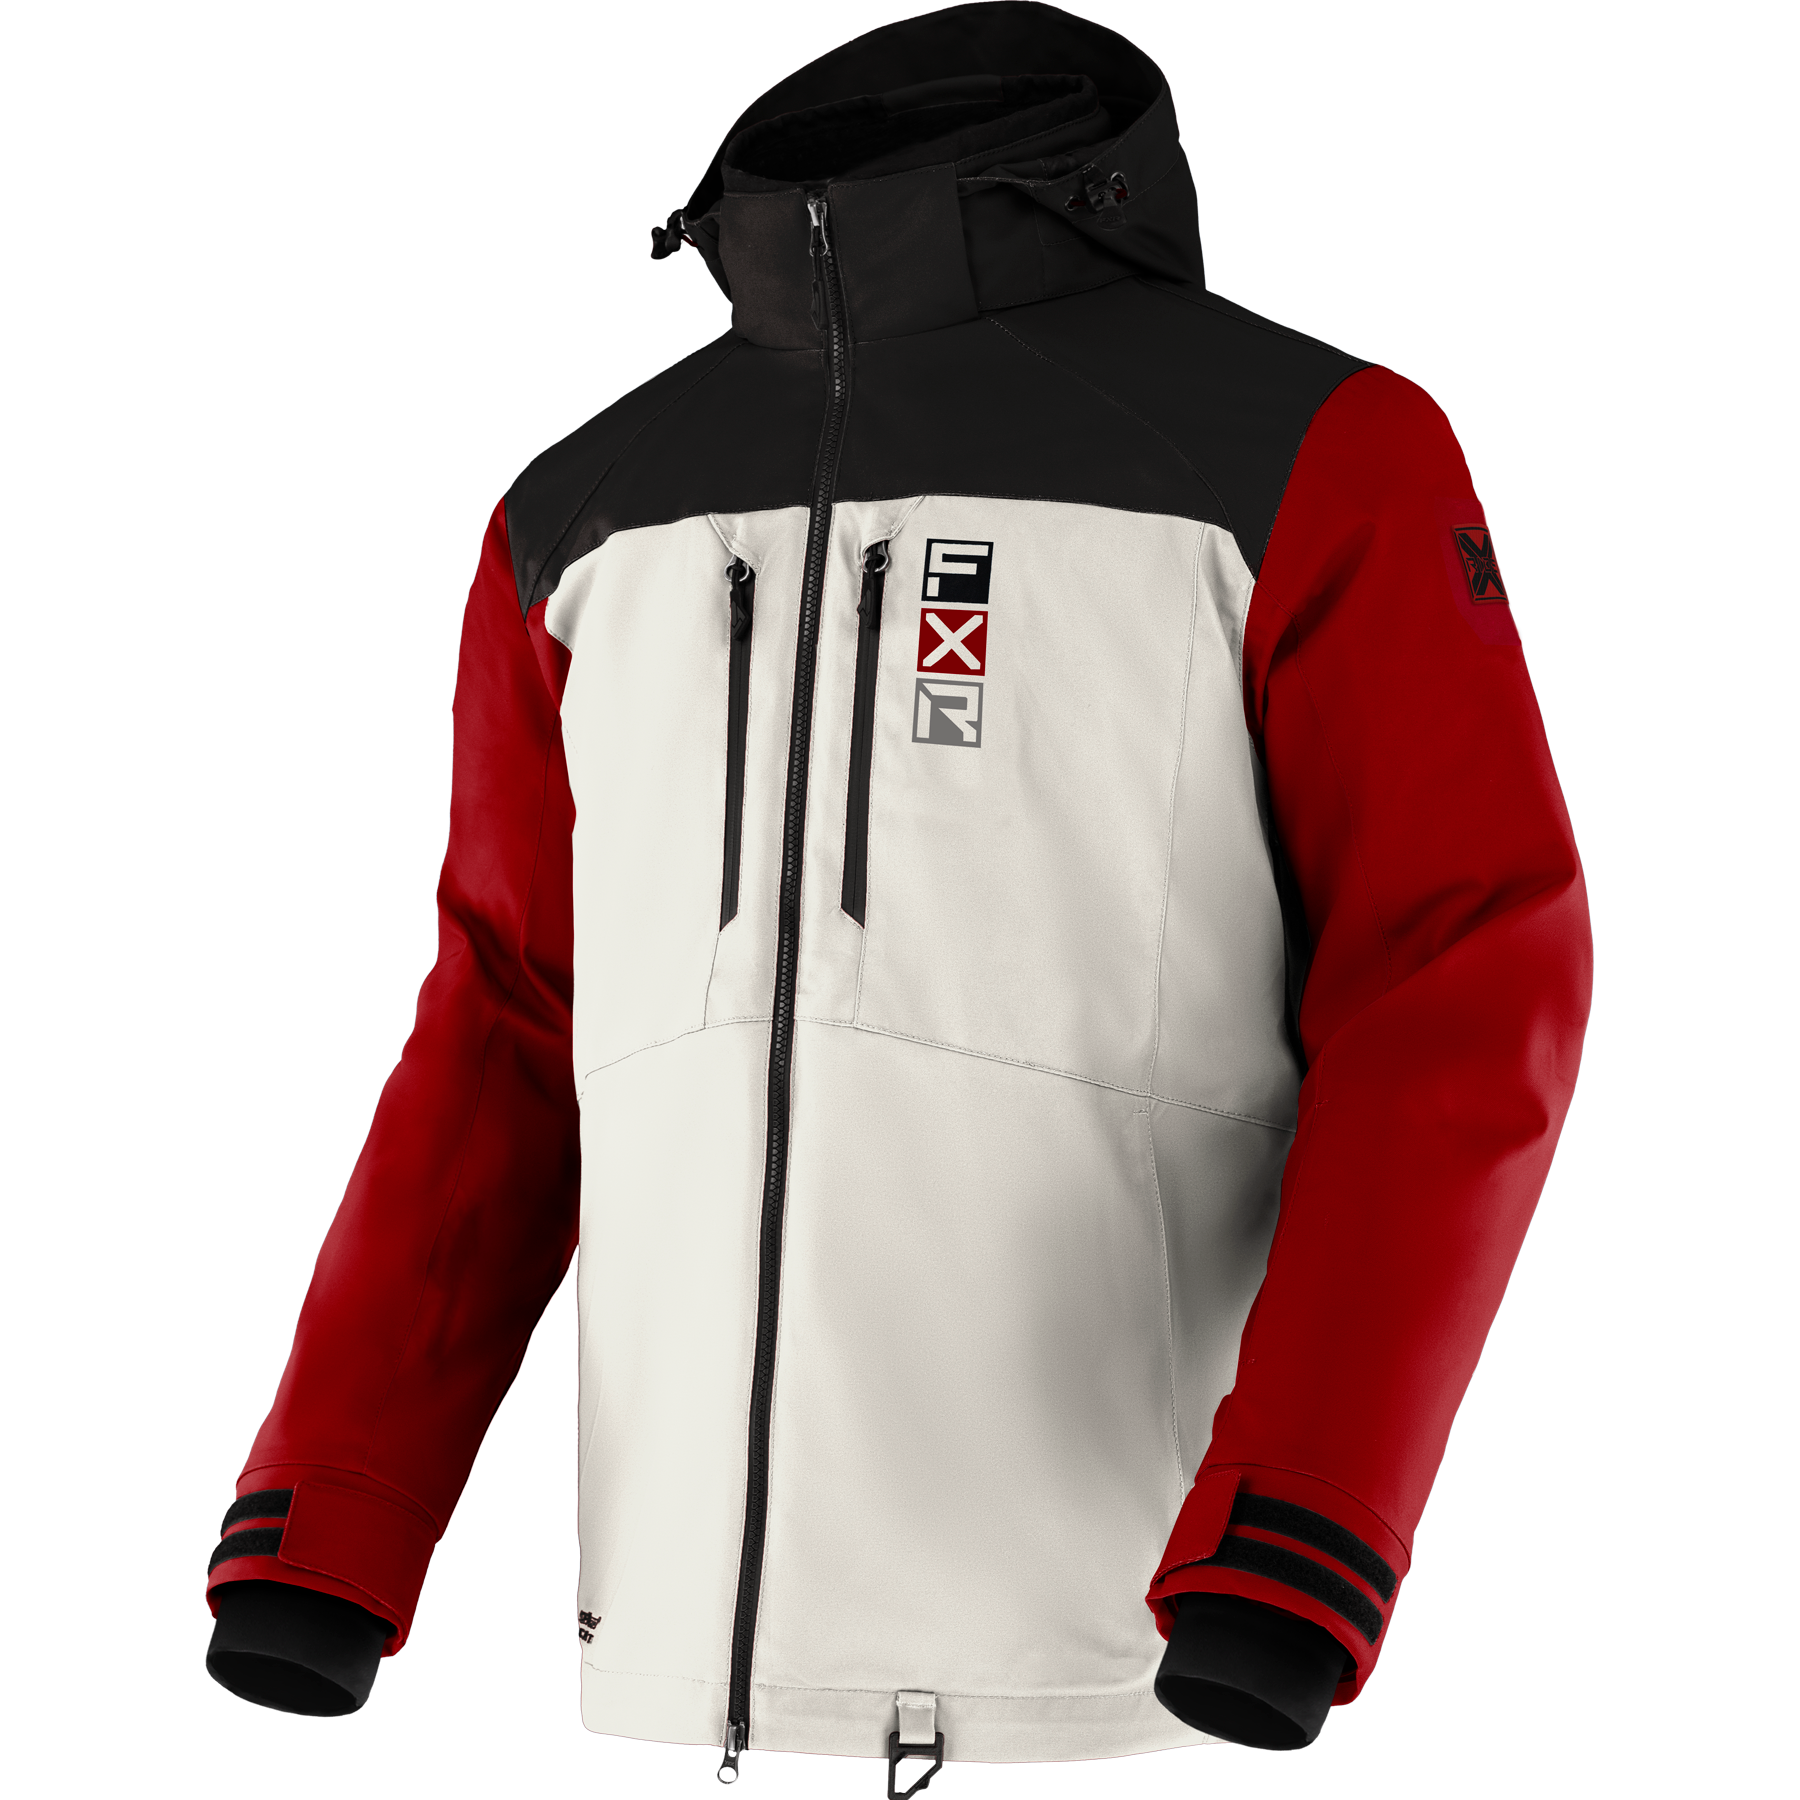 fxr racing insulated jackets for men ridge